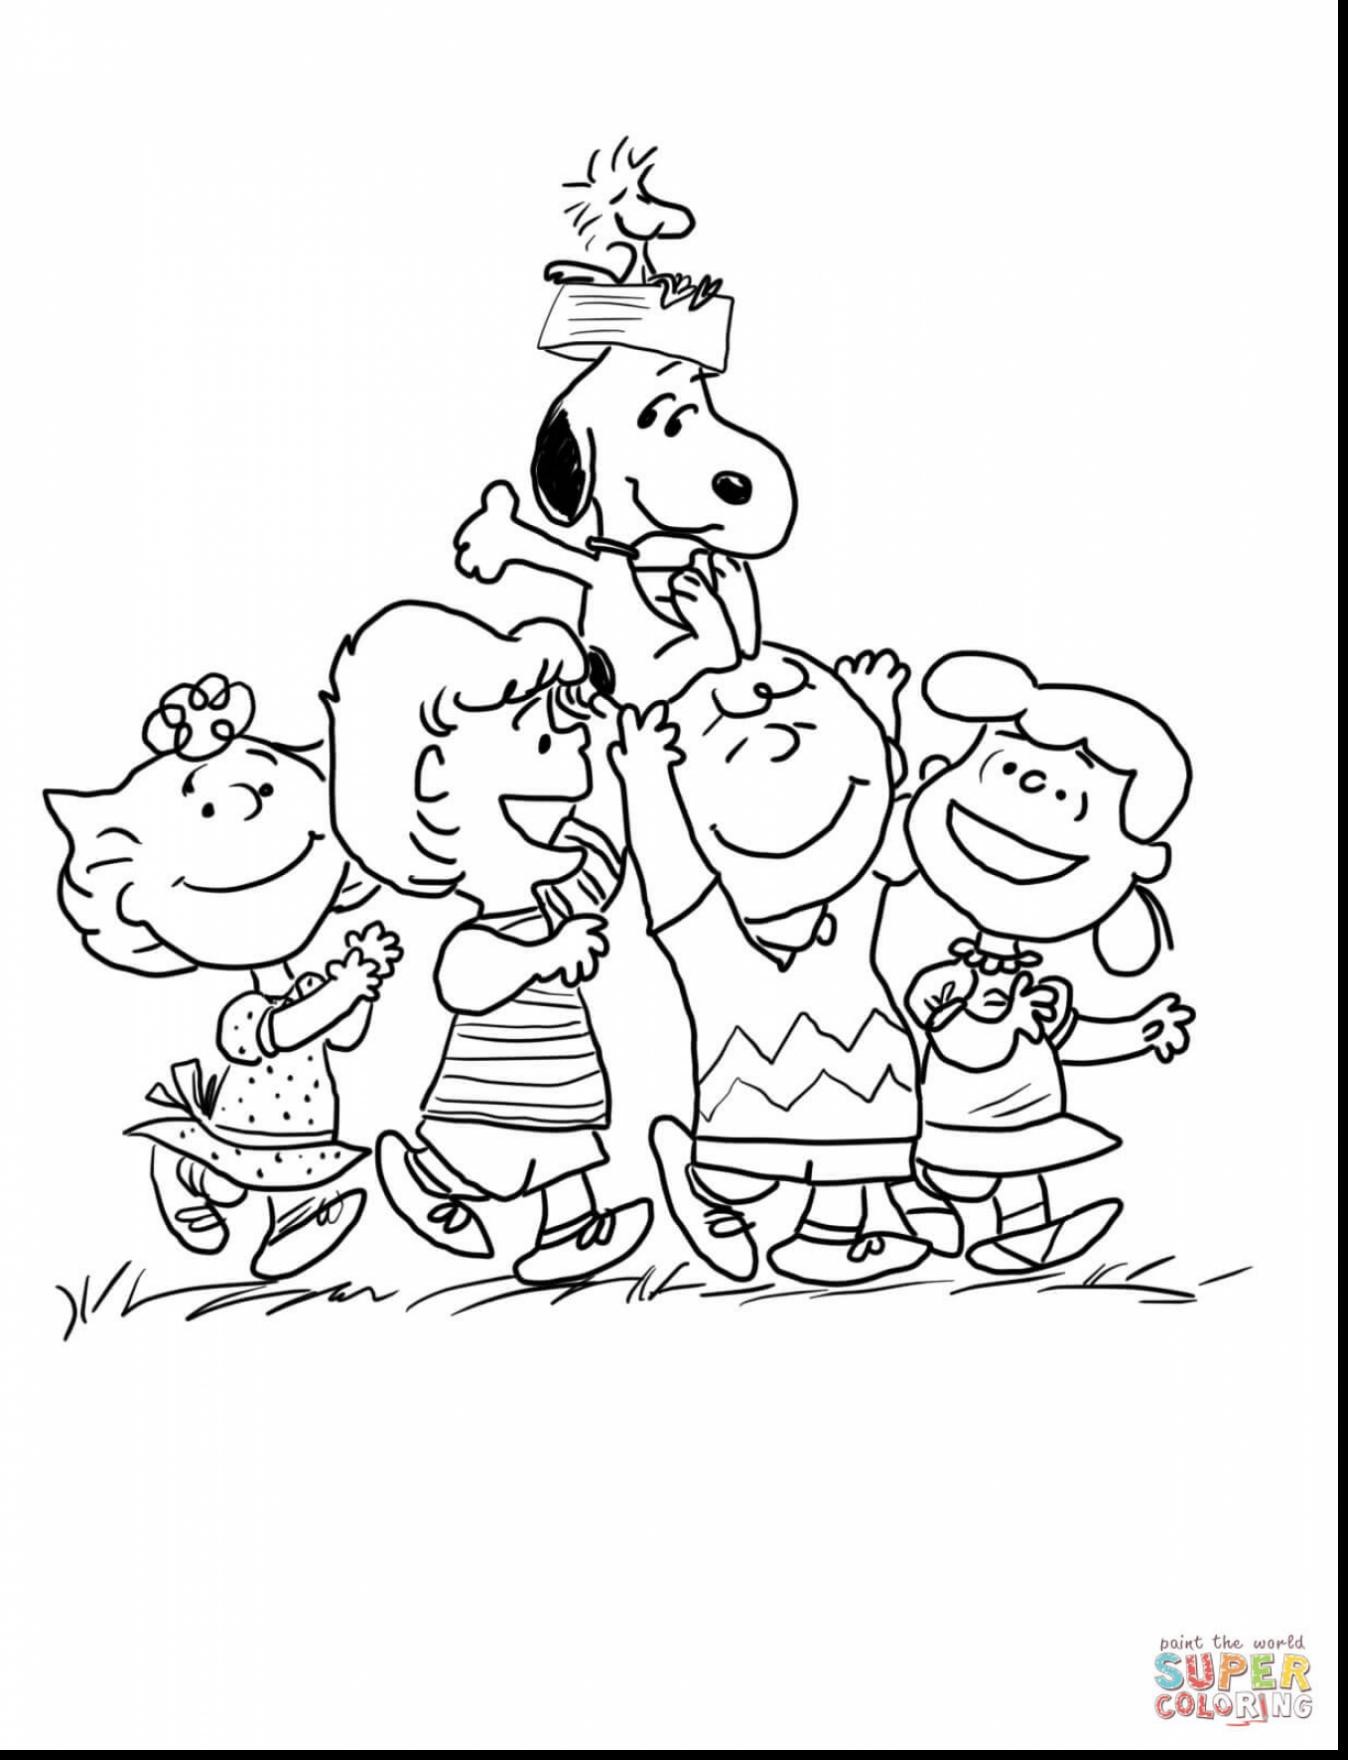 charlie-brown-christmas-coloring-pages-at-getcolorings-free-printable-colorings-pages-to